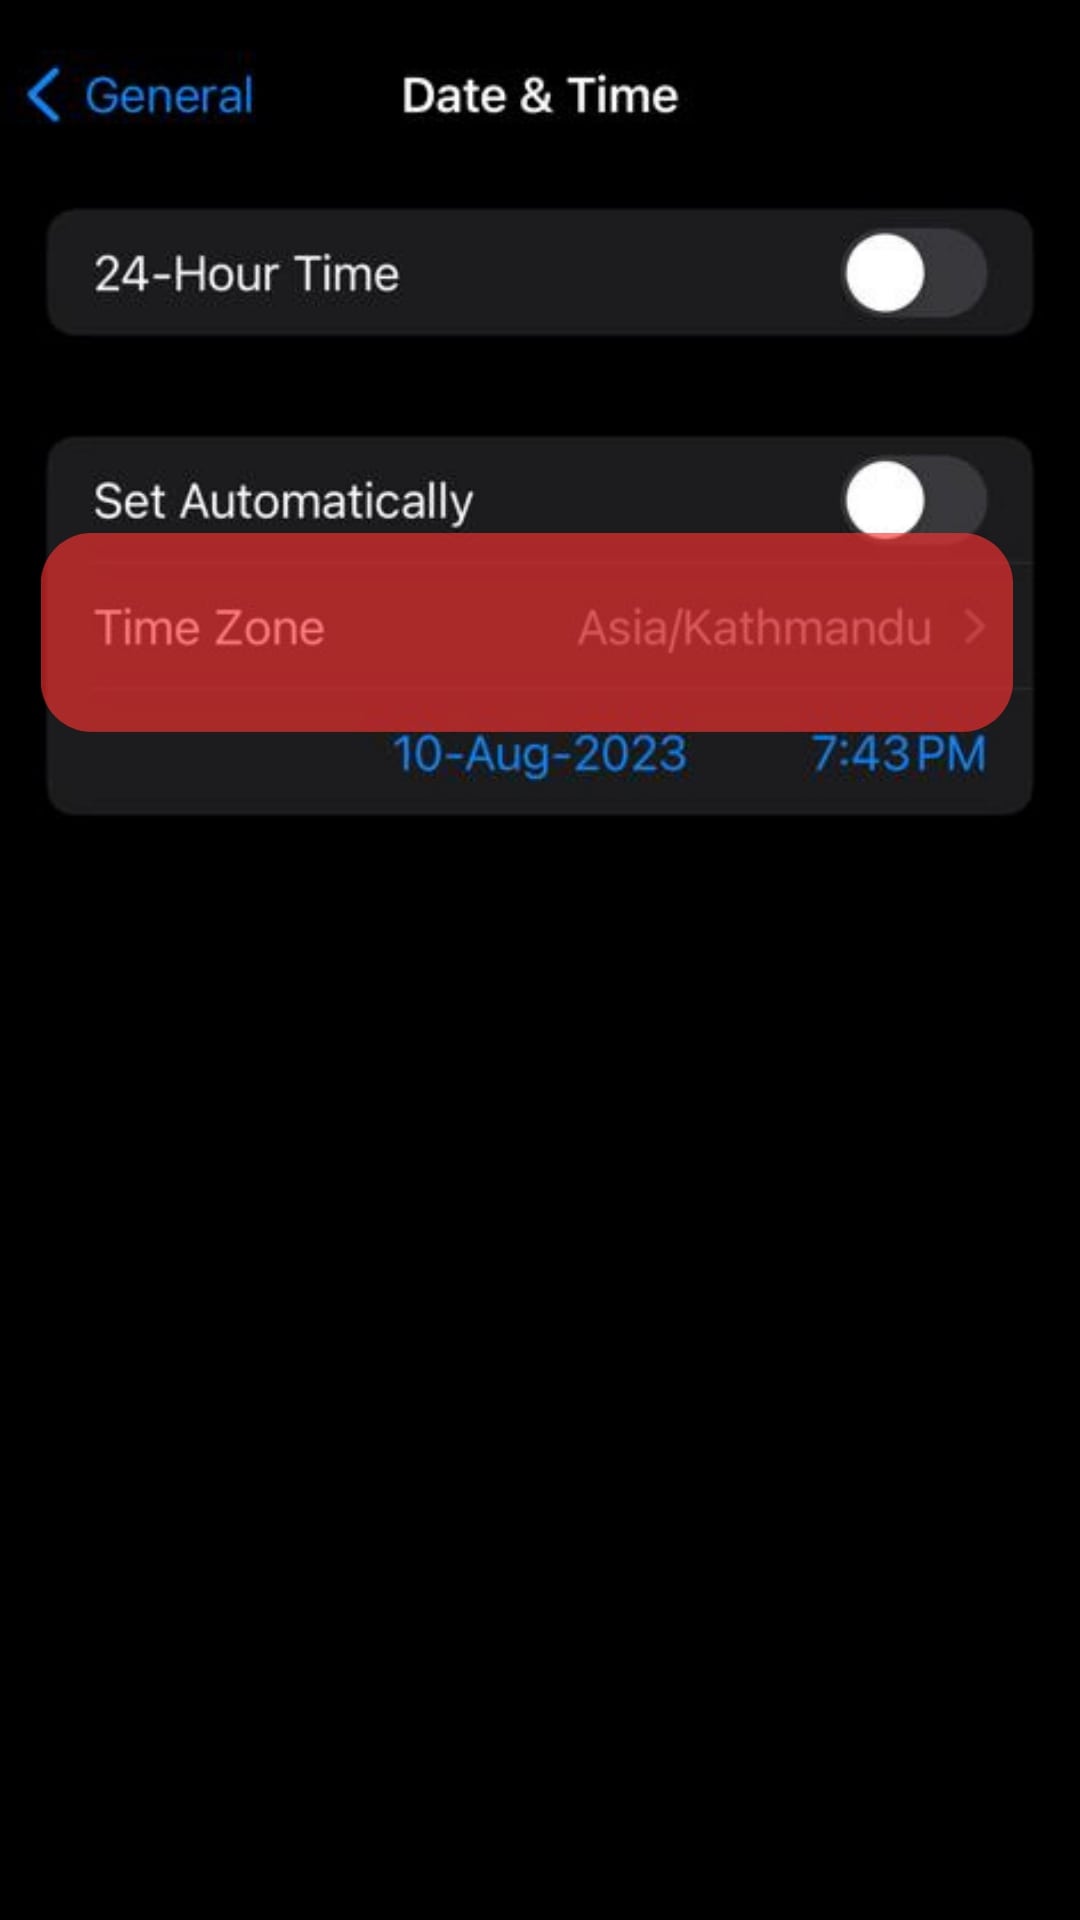 Click On Time Zone And Set Your Local Time Zone.